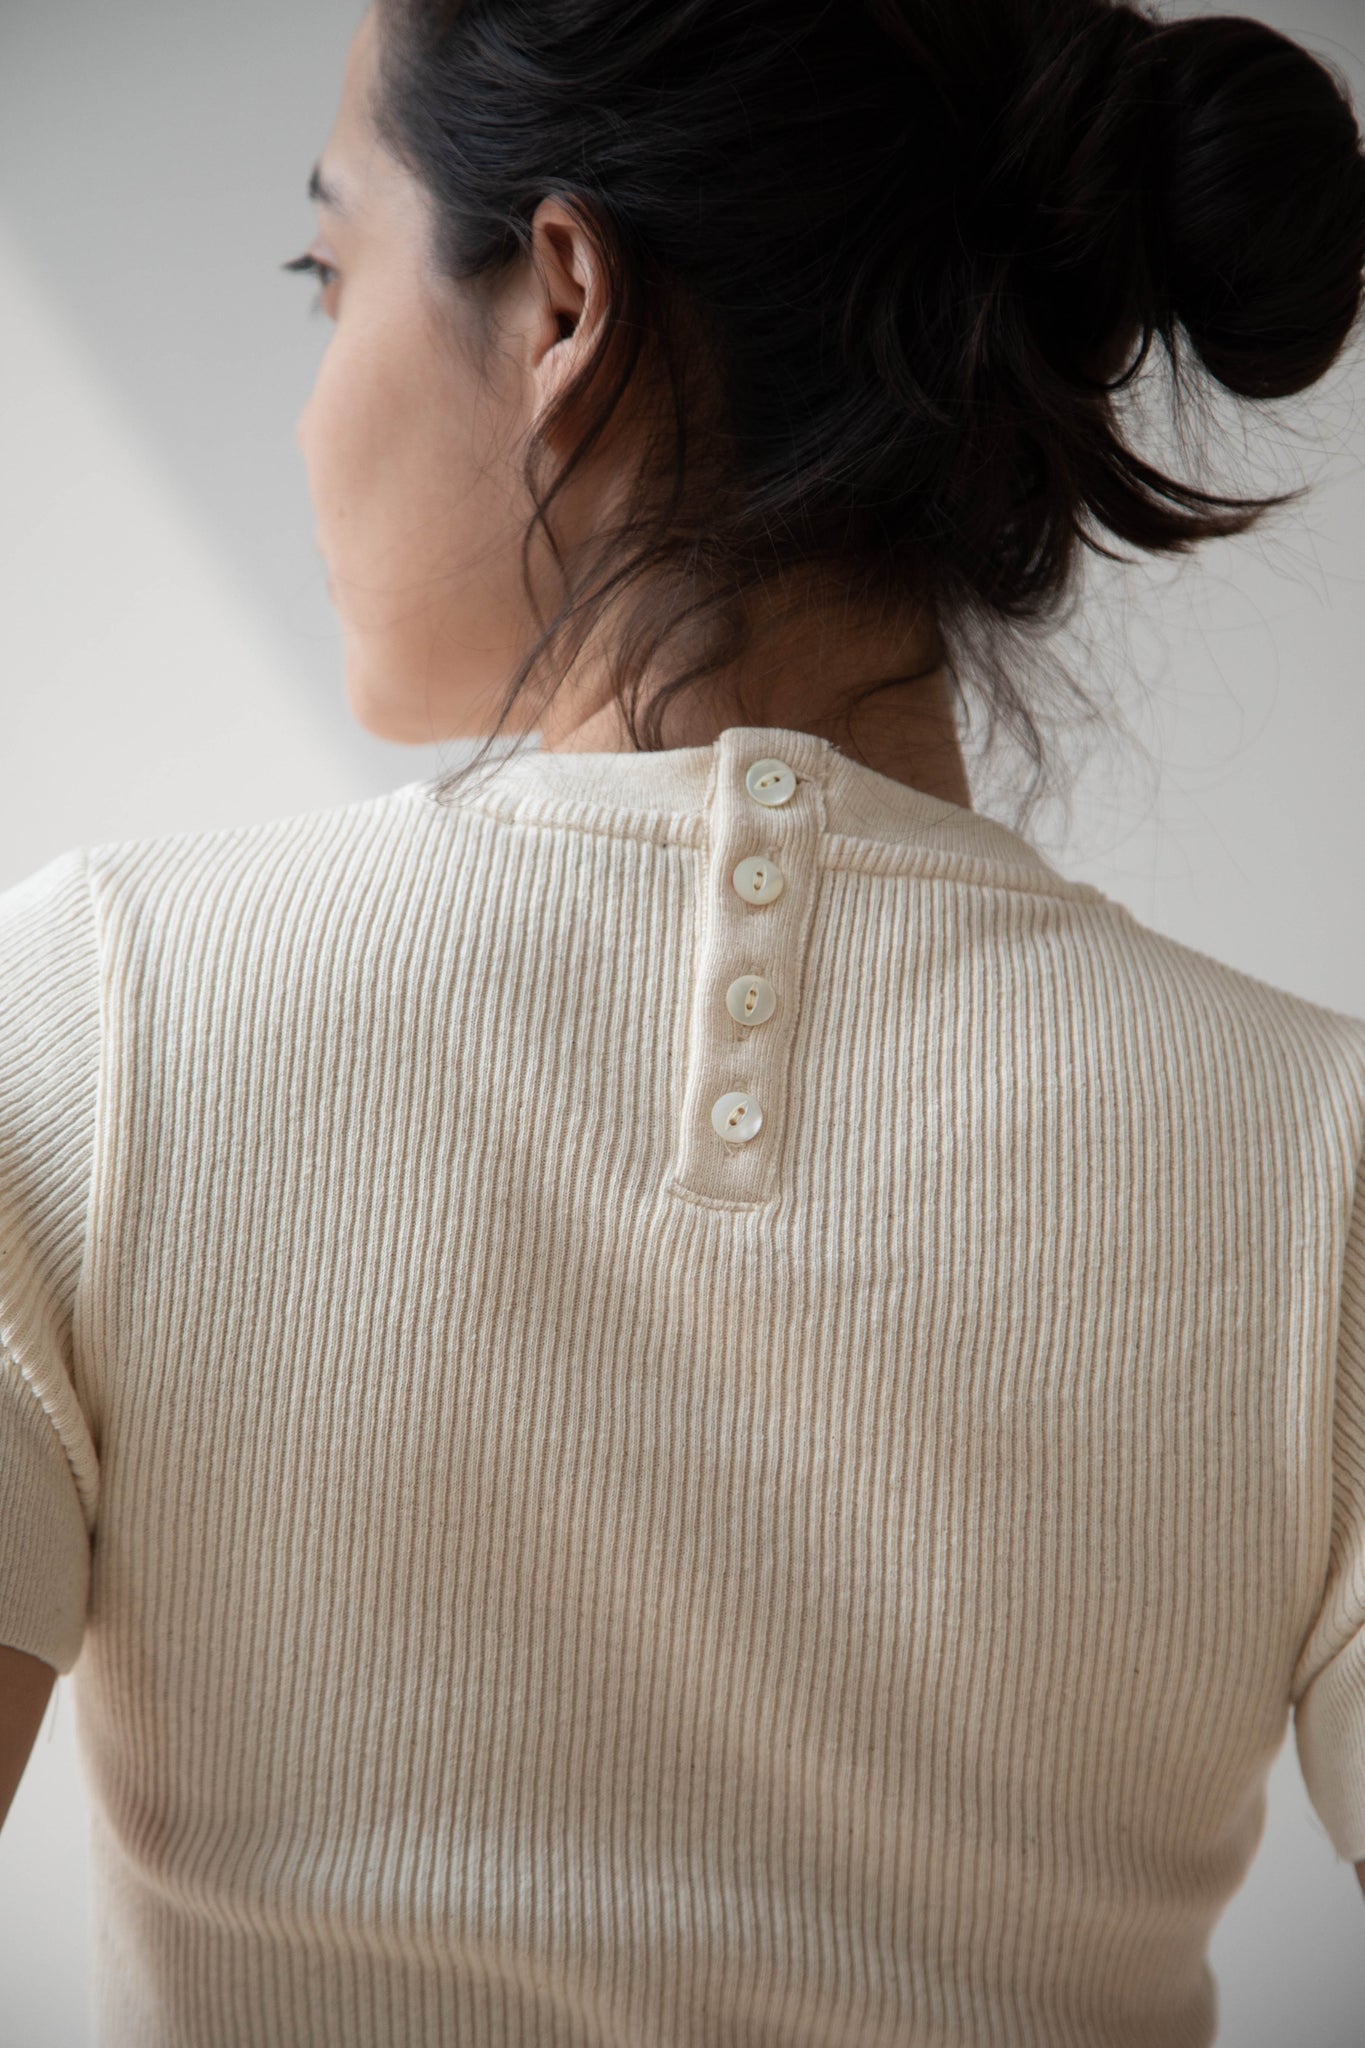 Old Man's Tailor | Ribbed Knit Half Sleeve Top in Natural